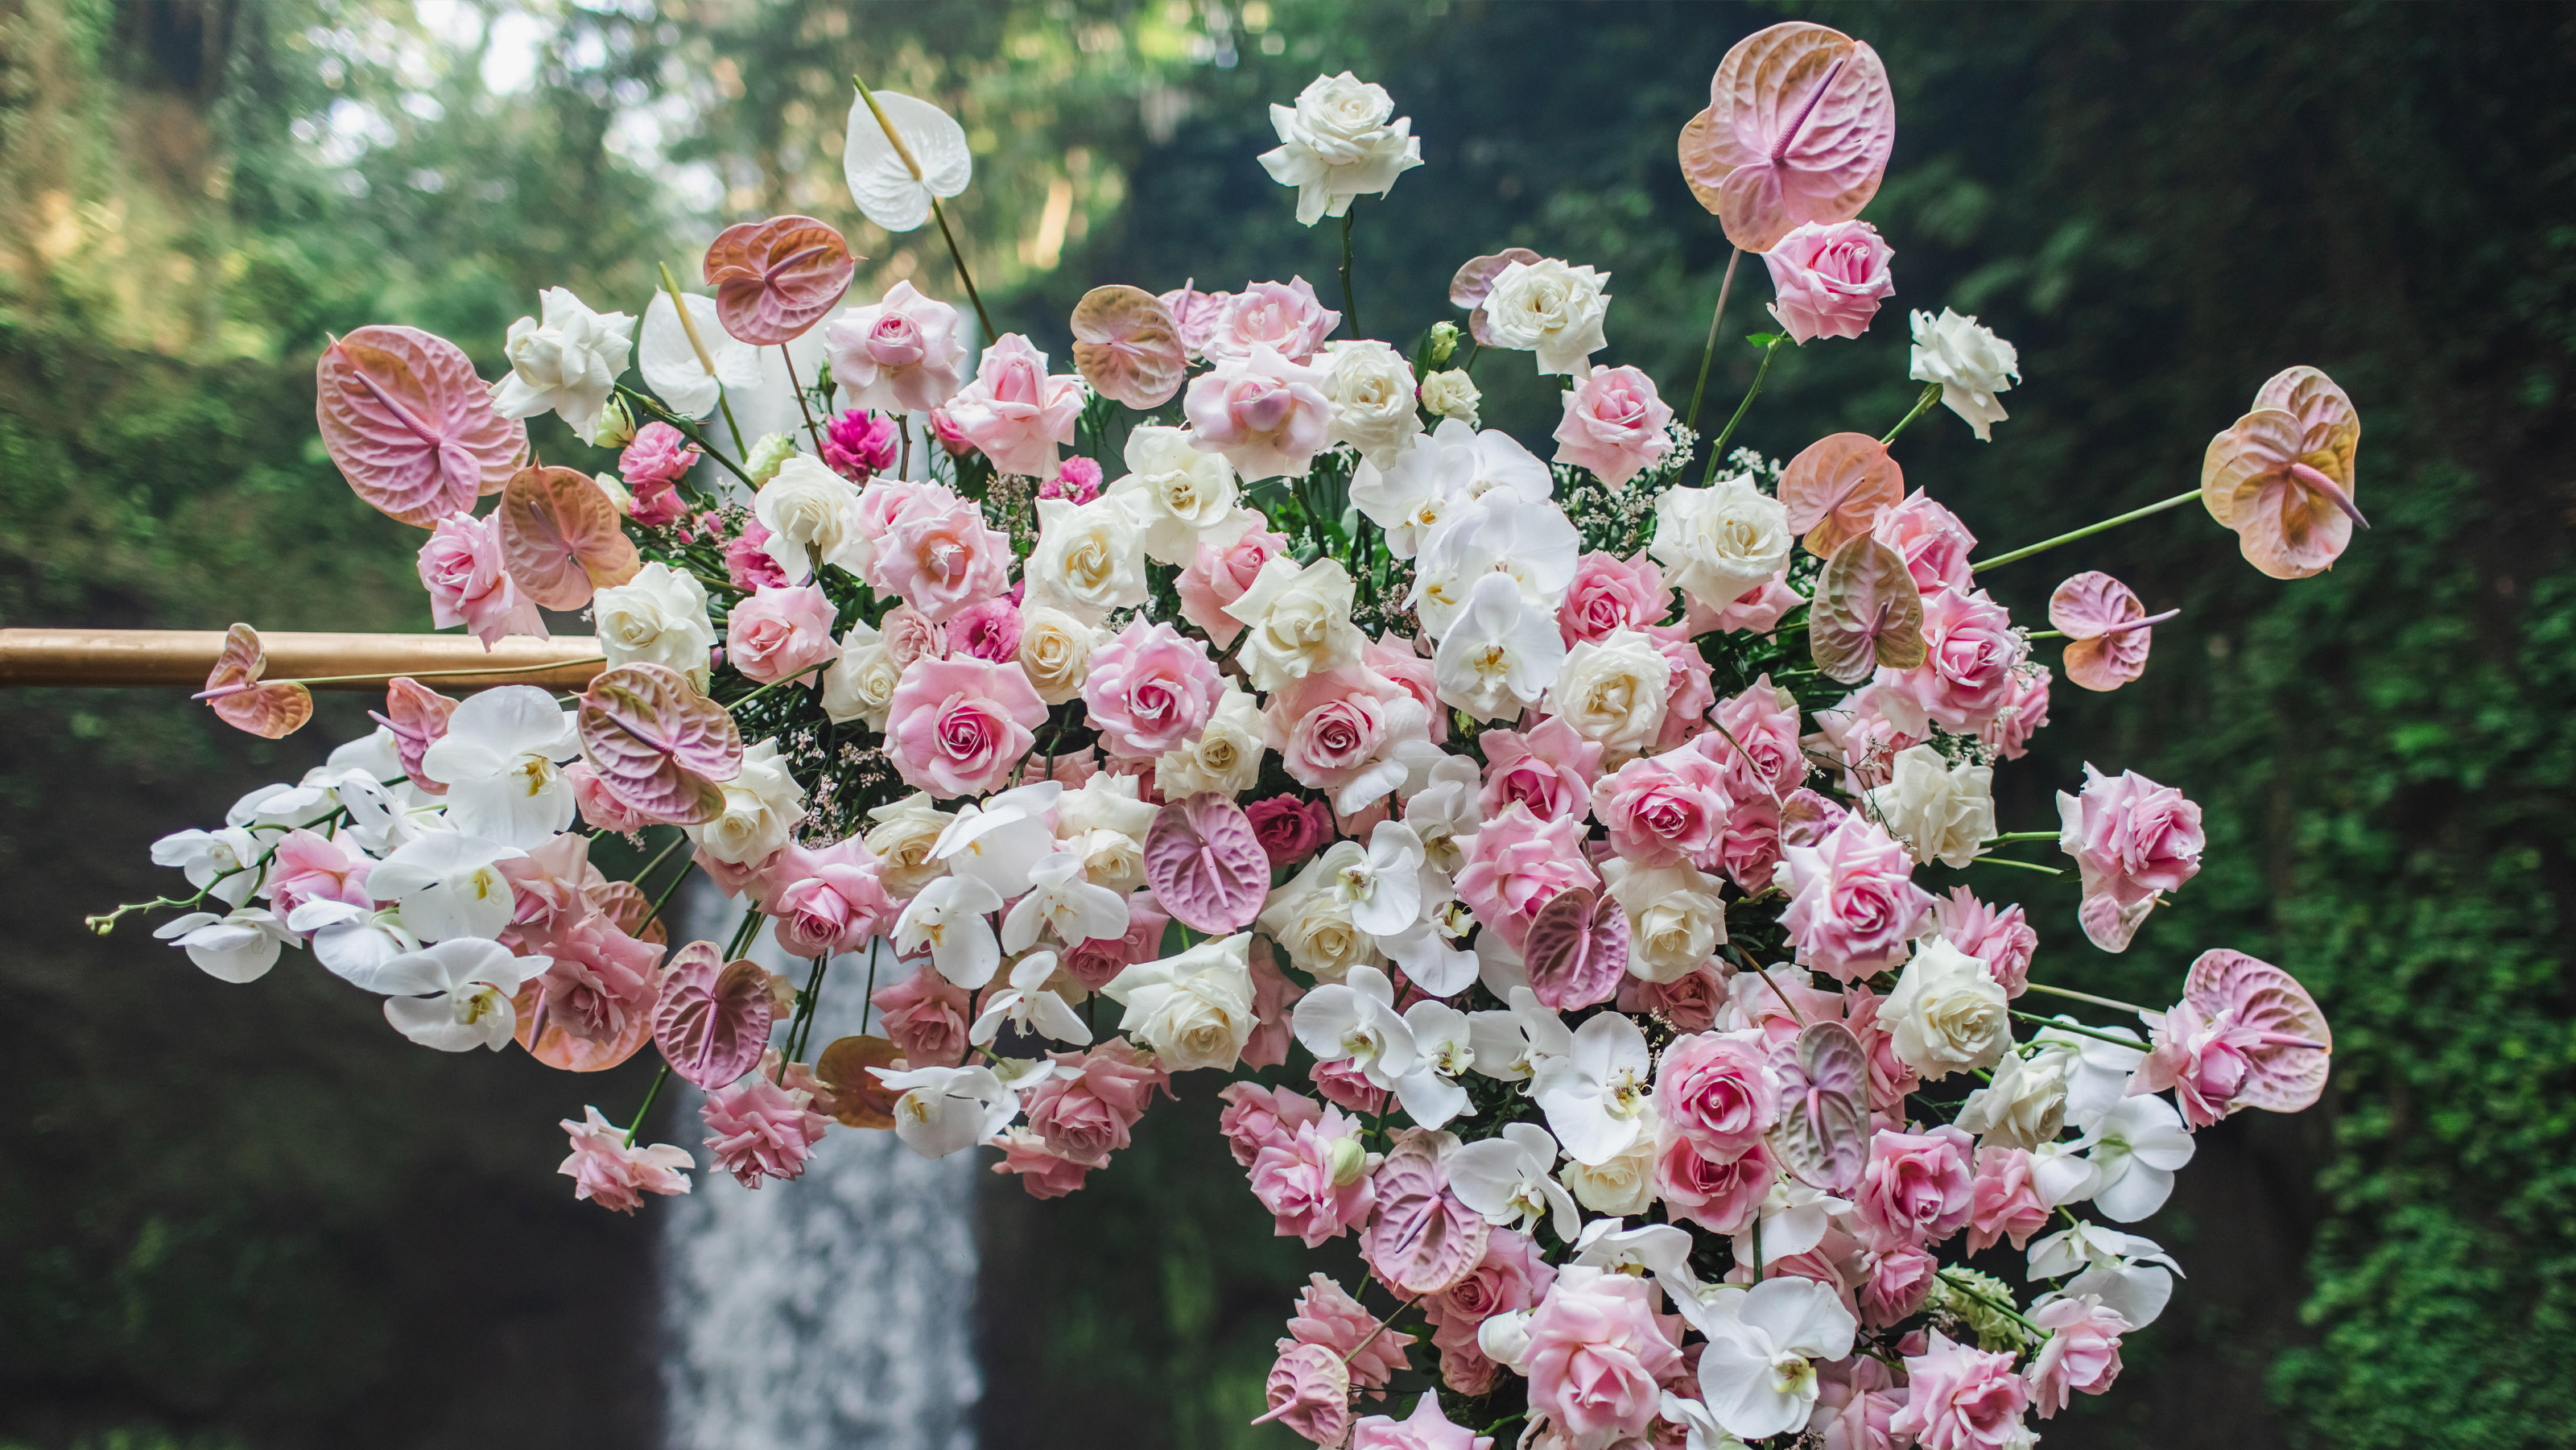 Flower wall ideas: 14 blooming backdrops for decorating special occasions |  Gardeningetc